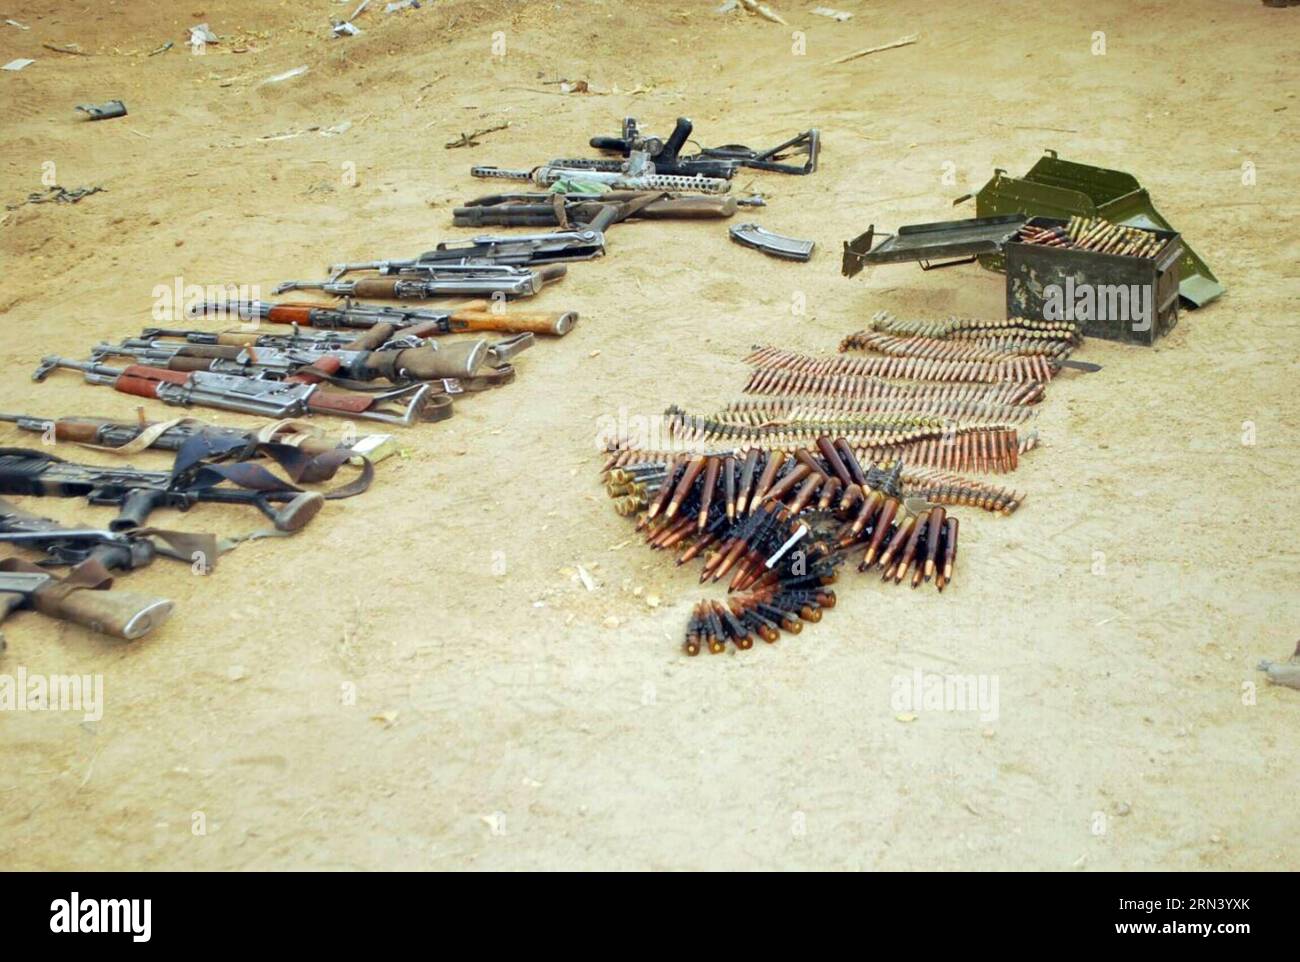 (150430) -- SAMBISA, April 30, 2015 -- Photo taken on April 30, 2015 shows the arms confiscated from the terrorists camps by the Nigerian troops in Sambisa forest, North-Eastern Nigeria. Up to 300 unidentified females have been rescued by Nigerian troops in restive northeast Sambisa forest following a daring and precise operation, a military spokesperson said on Tuesday. ) NIGERIA-SAMBISA-HOSTAGES-RESCUE Dare PUBLICATIONxNOTxINxCHN   April 30 2015 Photo Taken ON April 30 2015 Shows The Arms Confiscated from The Terrorists Camps by The Nigerian Troops in  Forest North Eastern Nigeria up to 300 Stock Photo